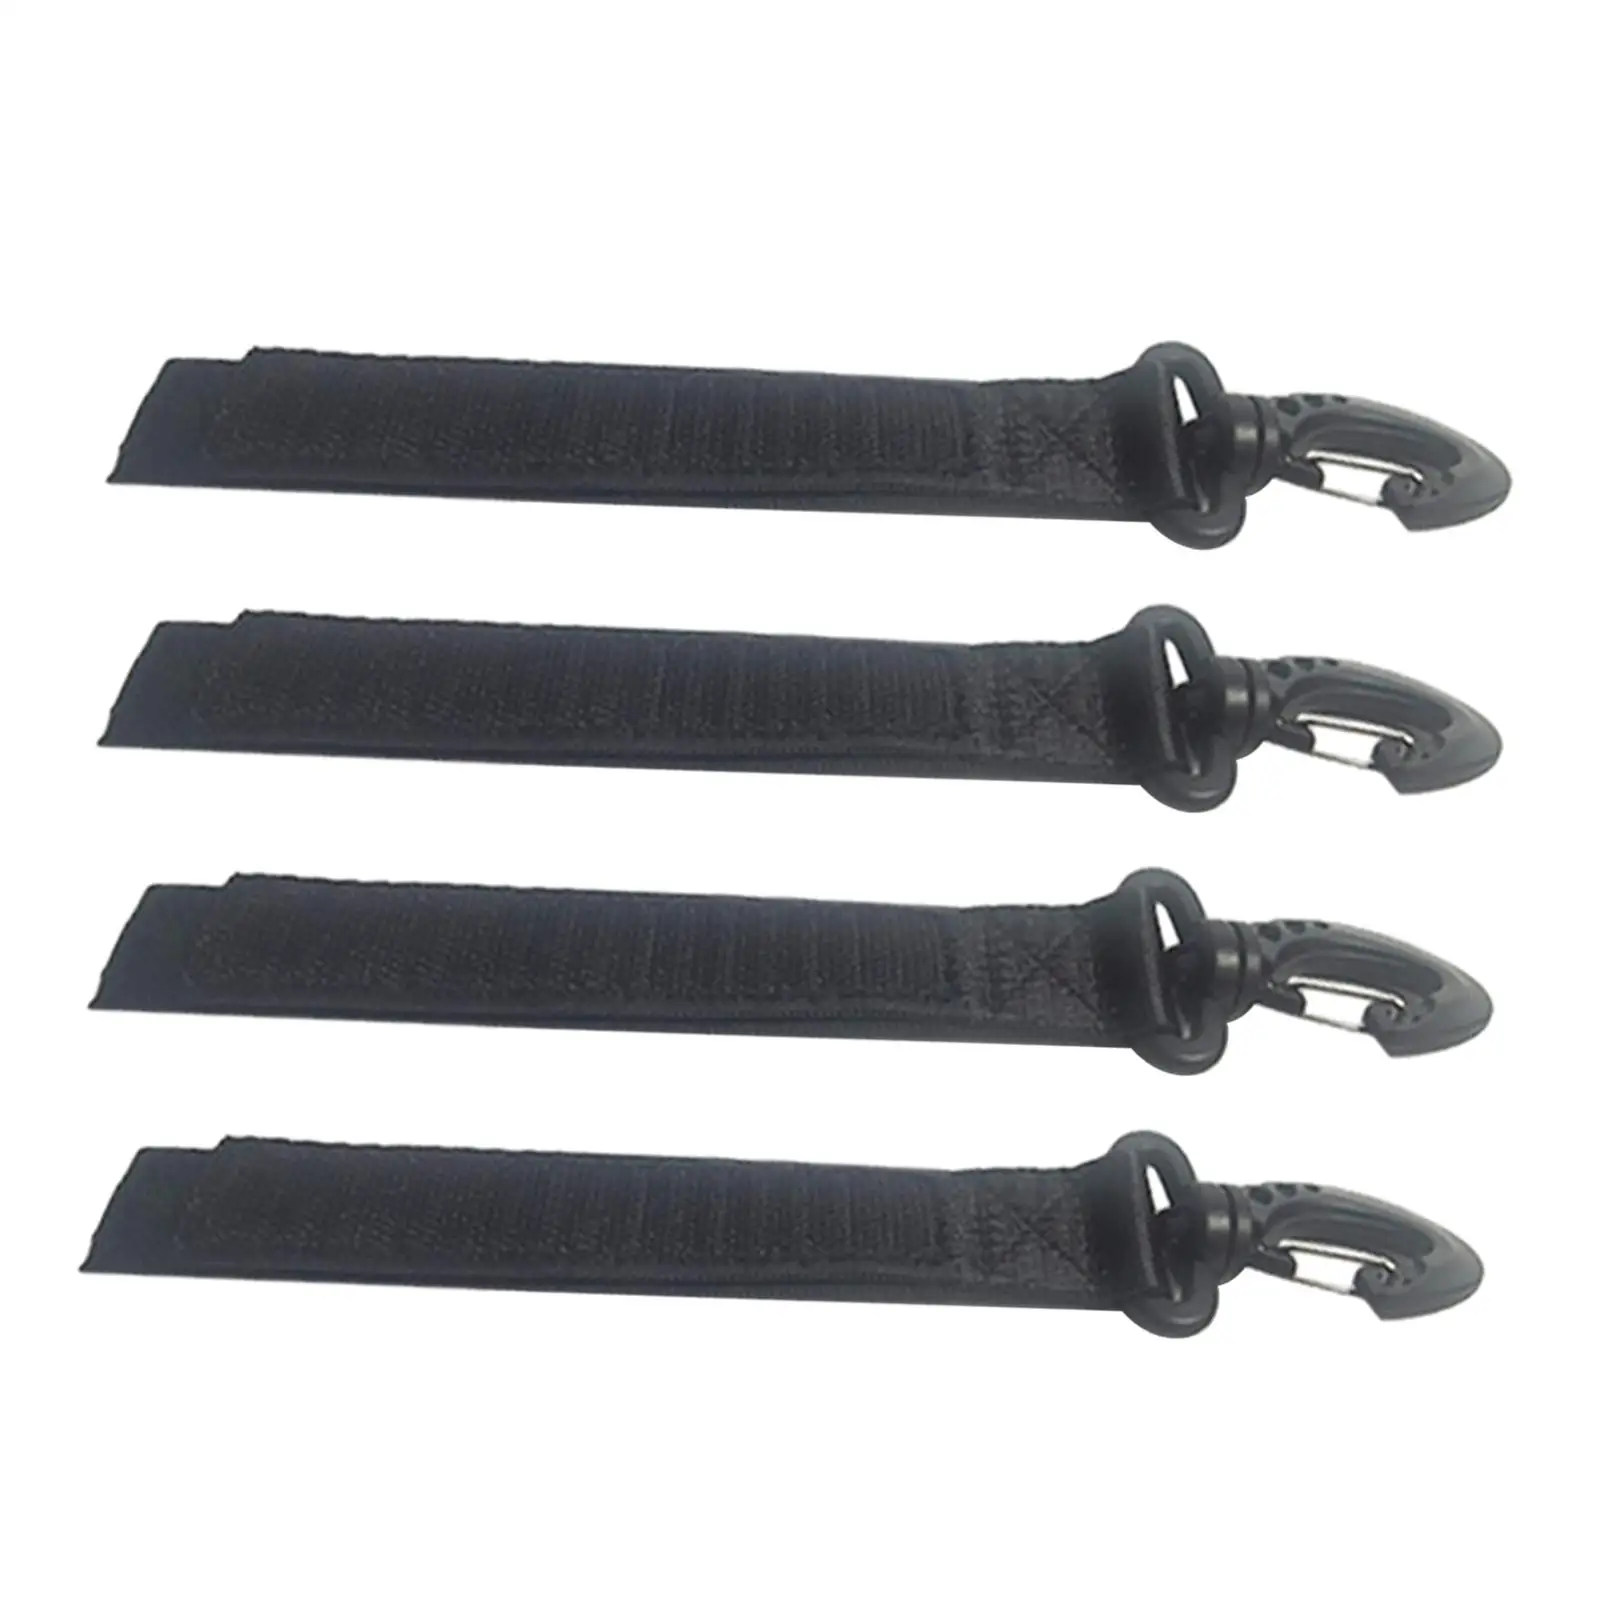 4Pcs Kayak Paddle Holder Strap Anti Lost Fishing Rod Storage for Stand up Paddle Board Garage Marine Rowing Inflatable Boat